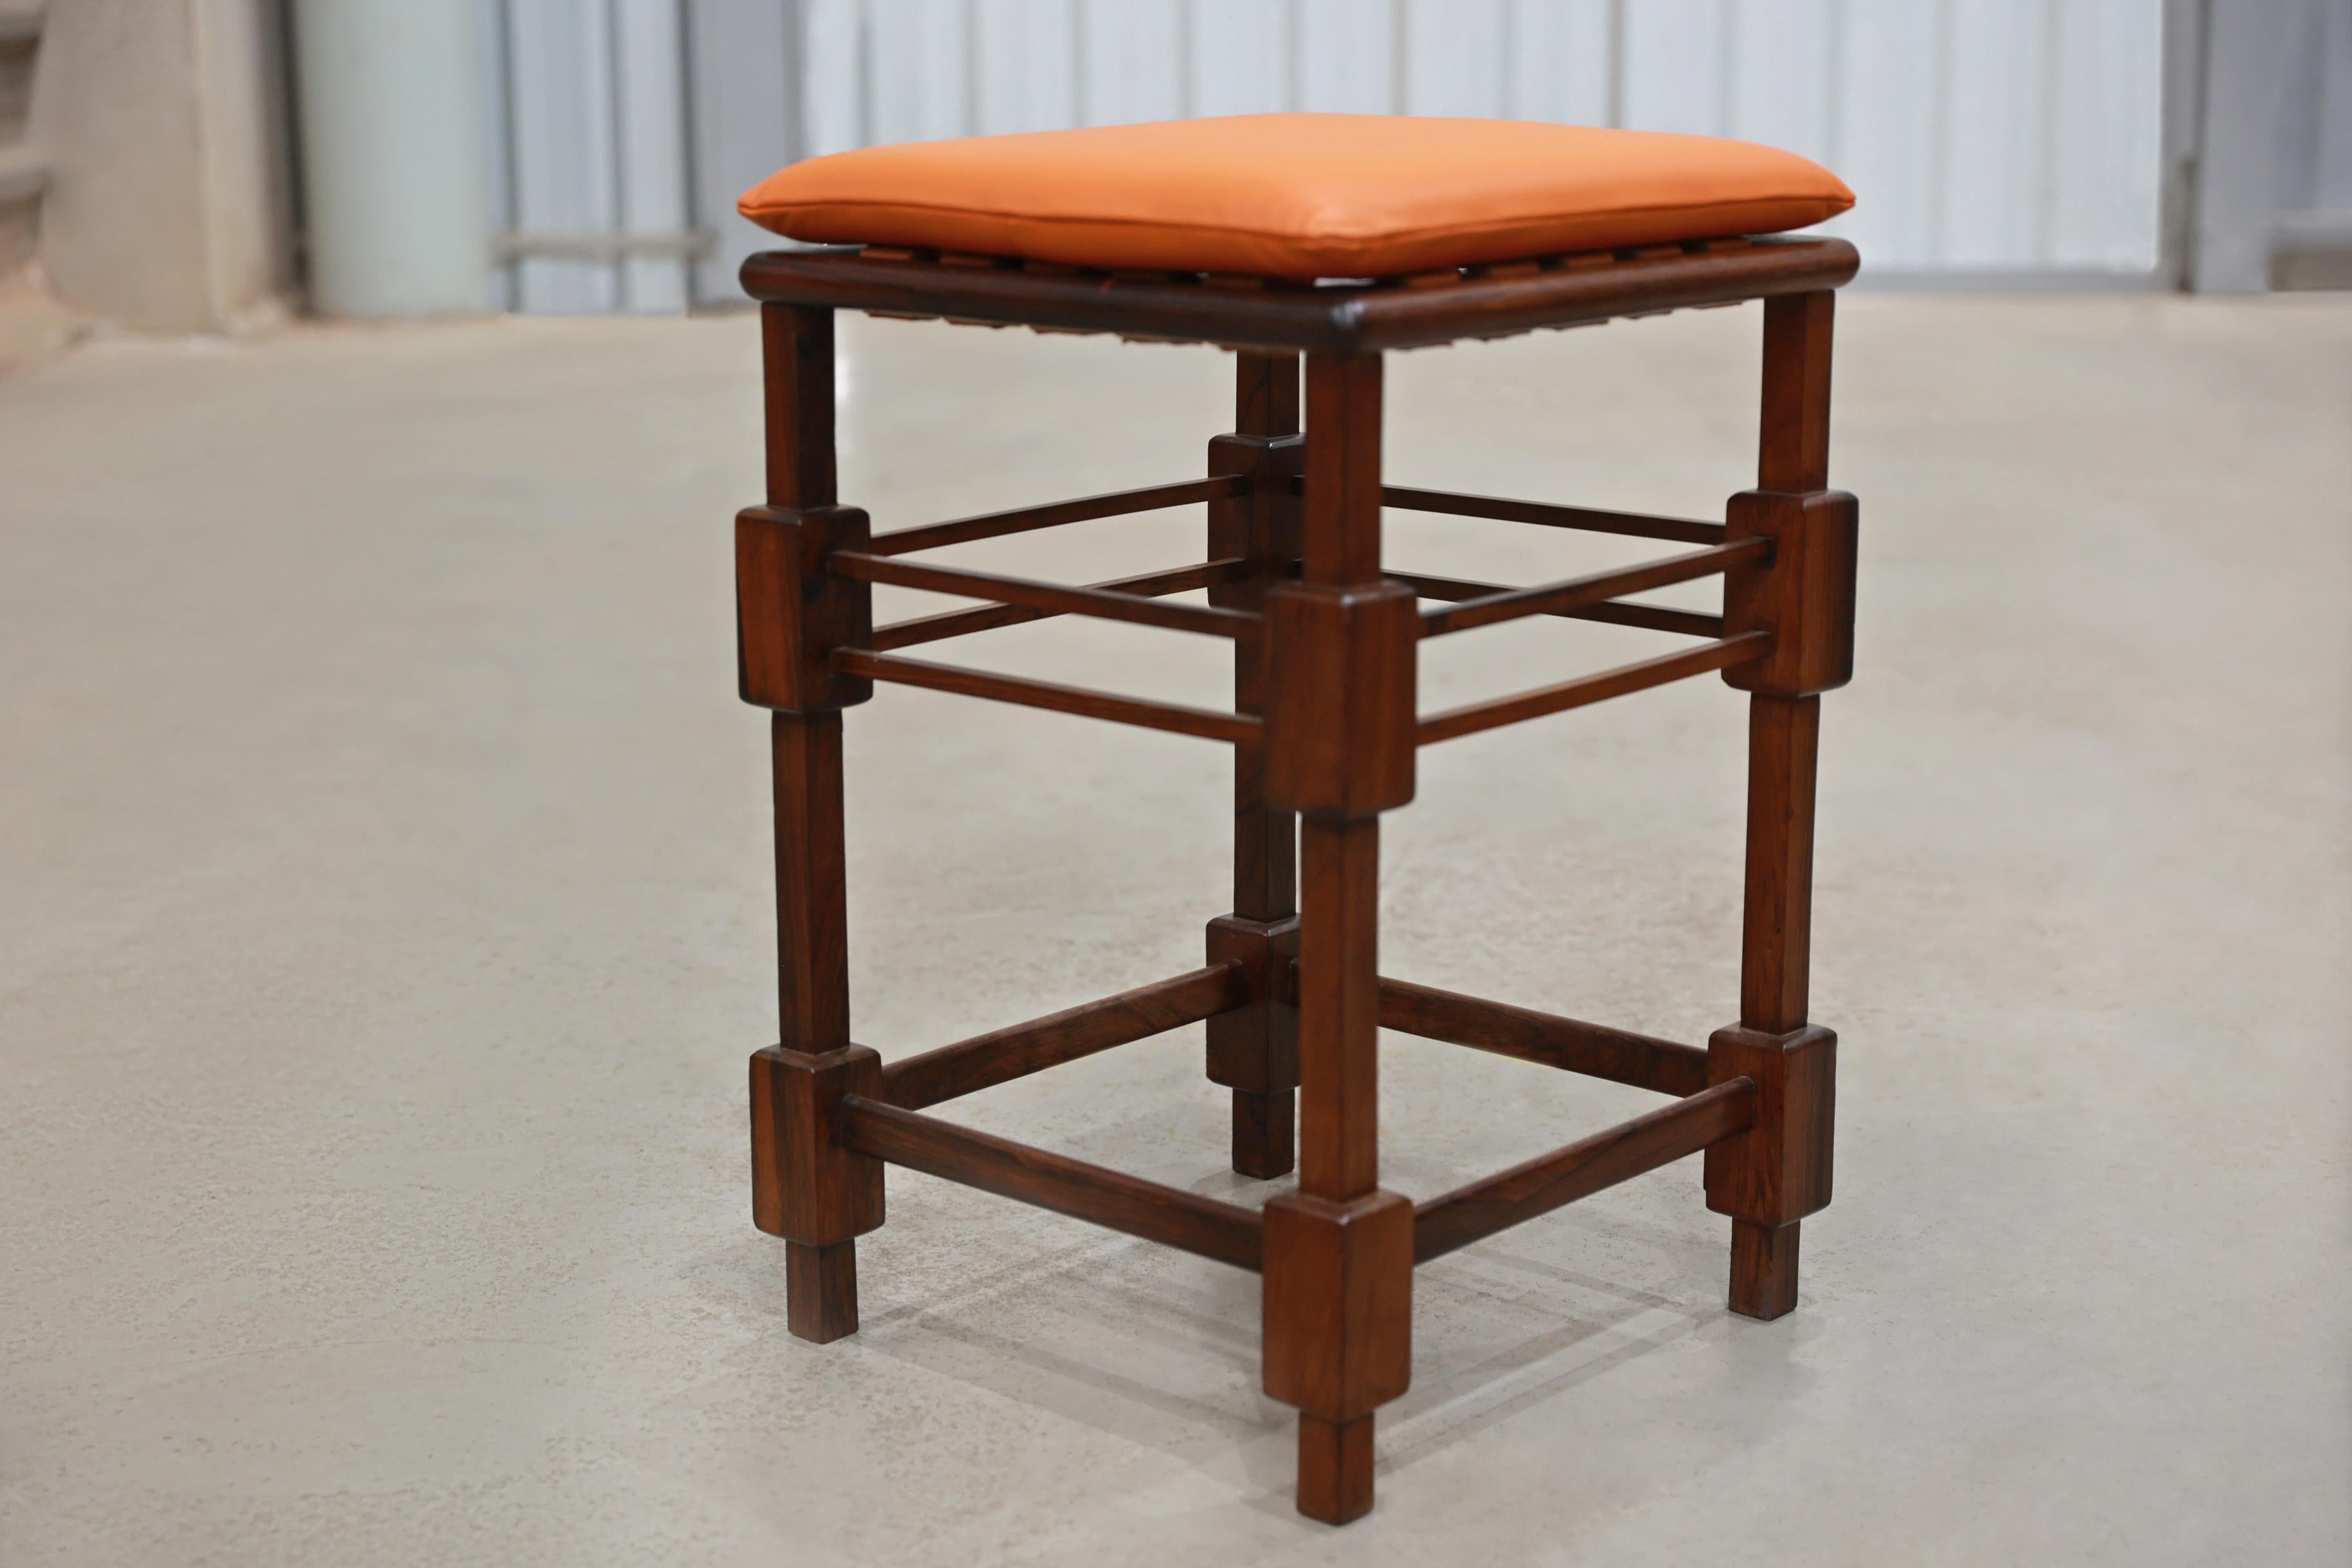 Available TODAY in NYC including FREE DOMESTIC SHIPPING, these stool s in Rosewood & Leather by Sergio Ropdrigues, 1960s is nothing less than gorgeous!

The body of this stool is made with a dark brown rosewood (also known as jacaranda). The four